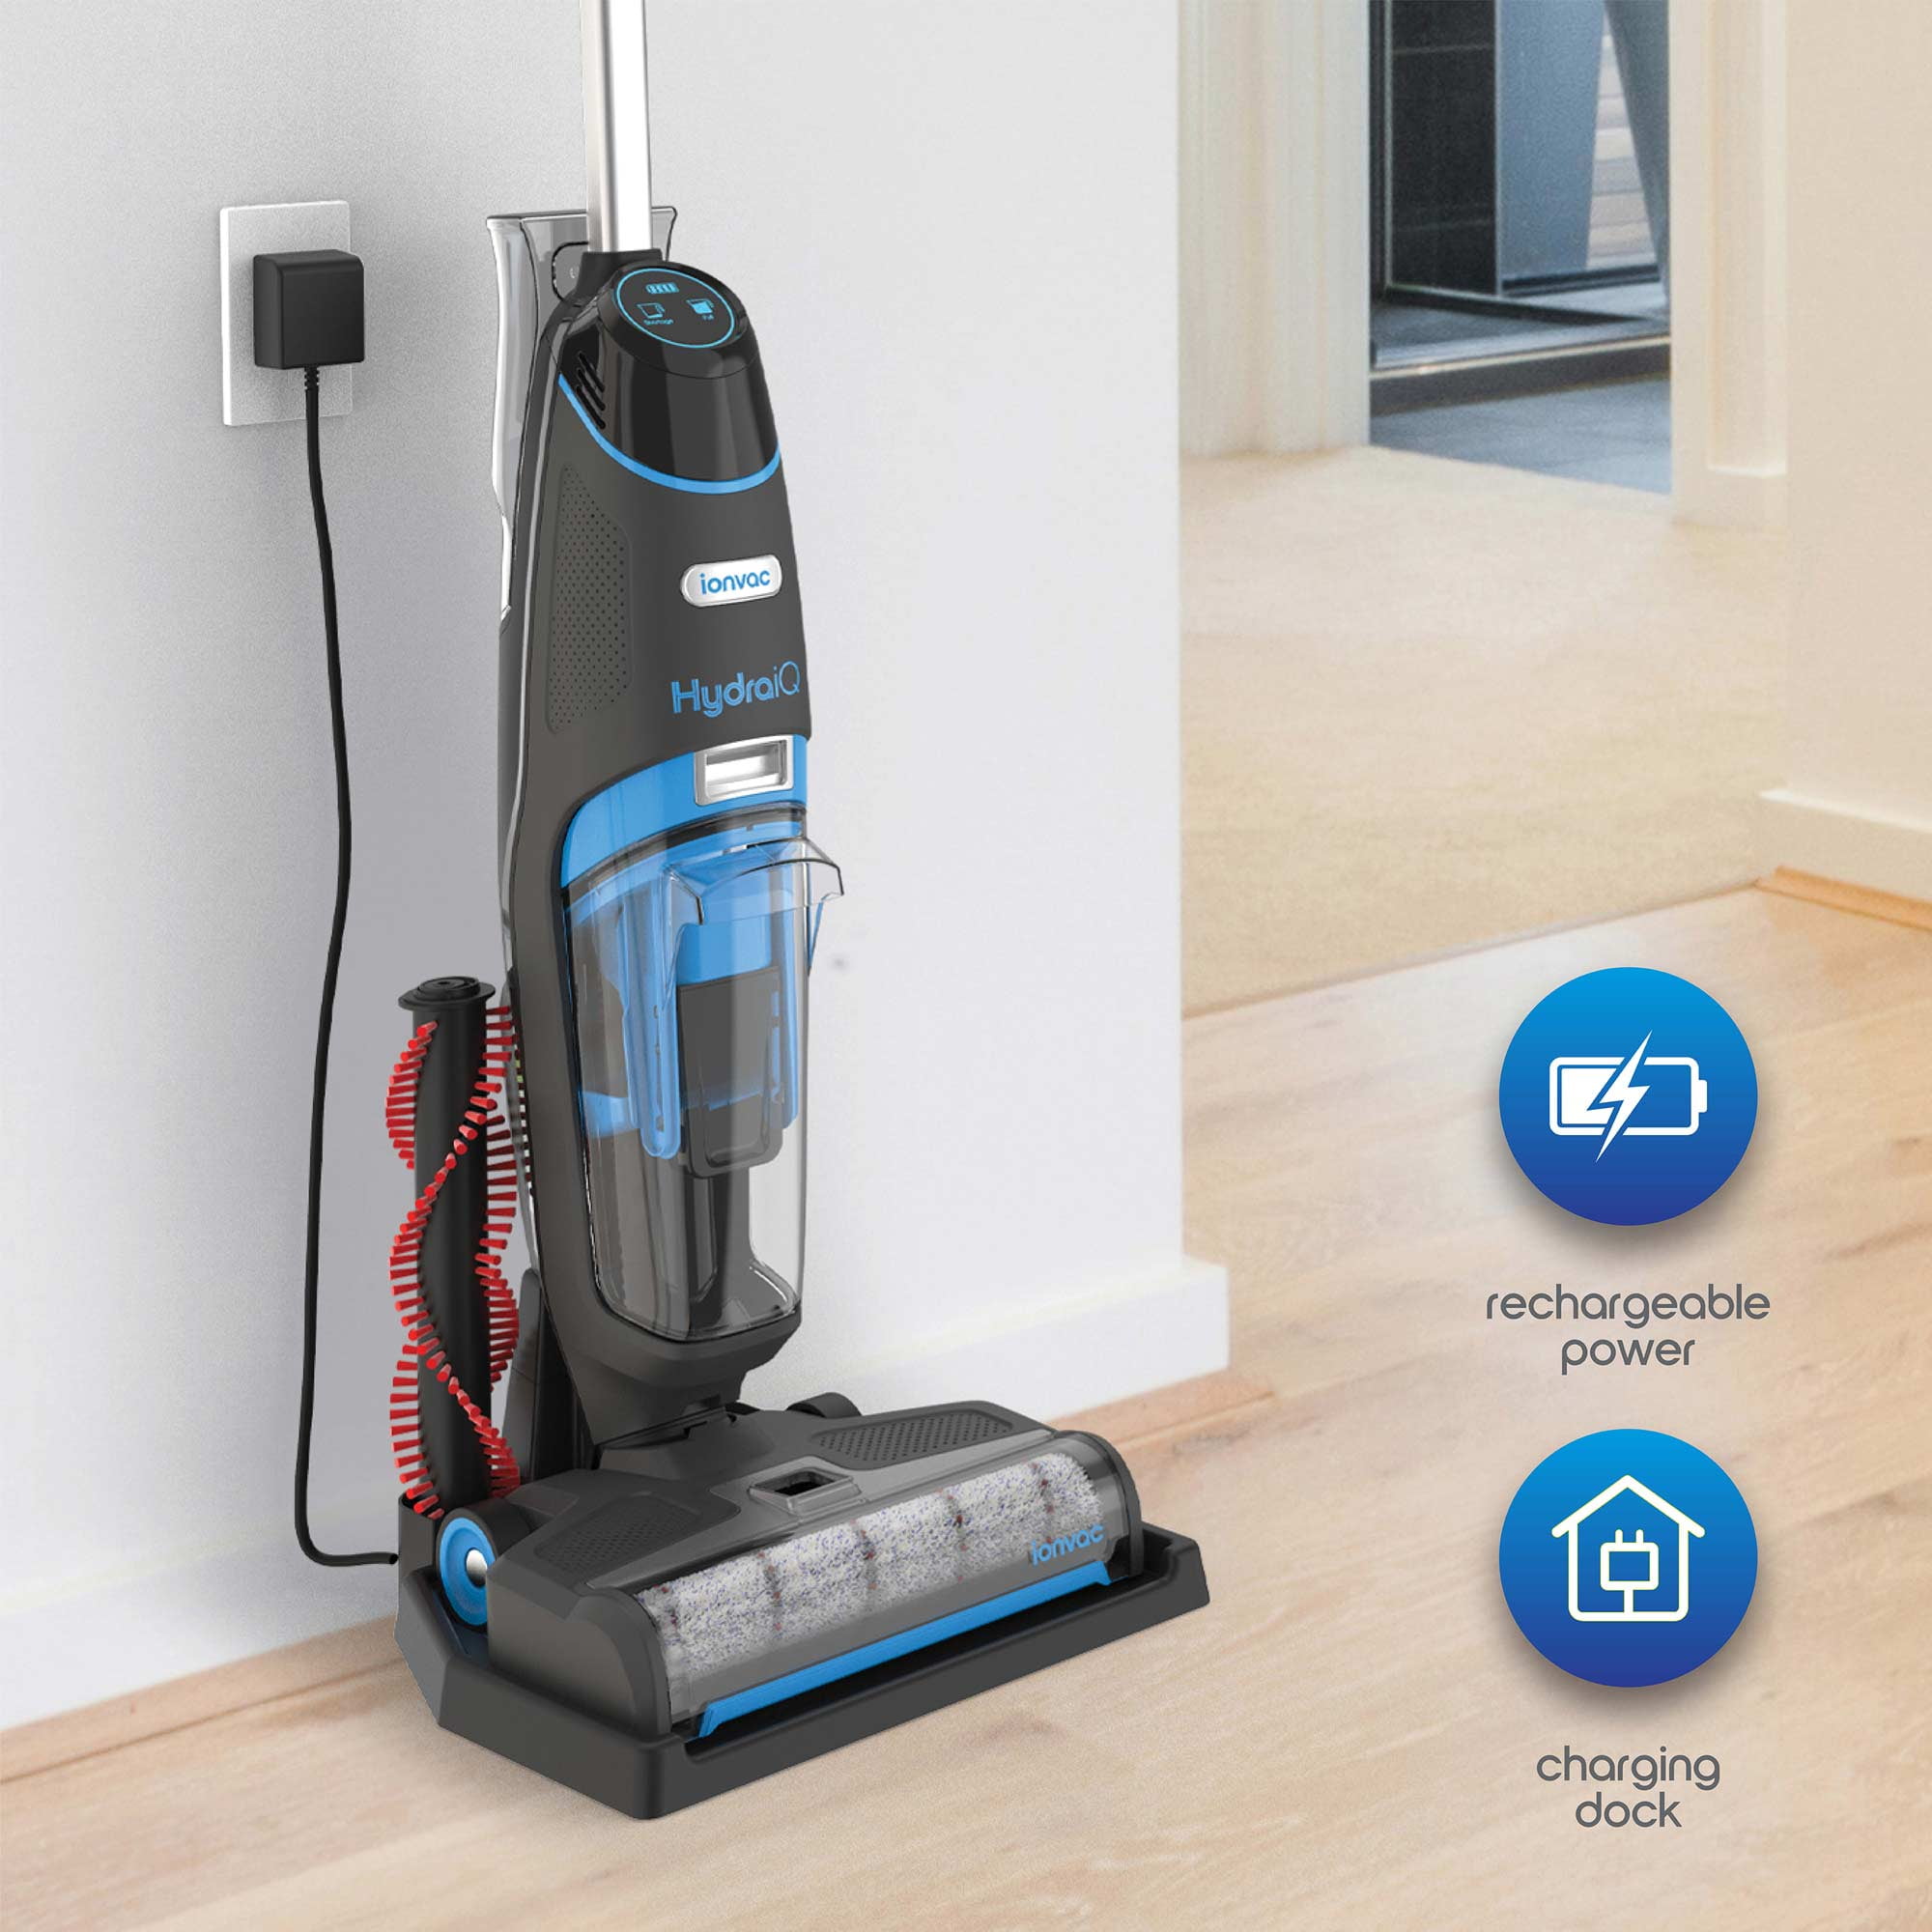 ionvac HydraiQ – Cordless All-in-One Wet/Dry Hardwood Floor and Rug Vacuum  Cleaner